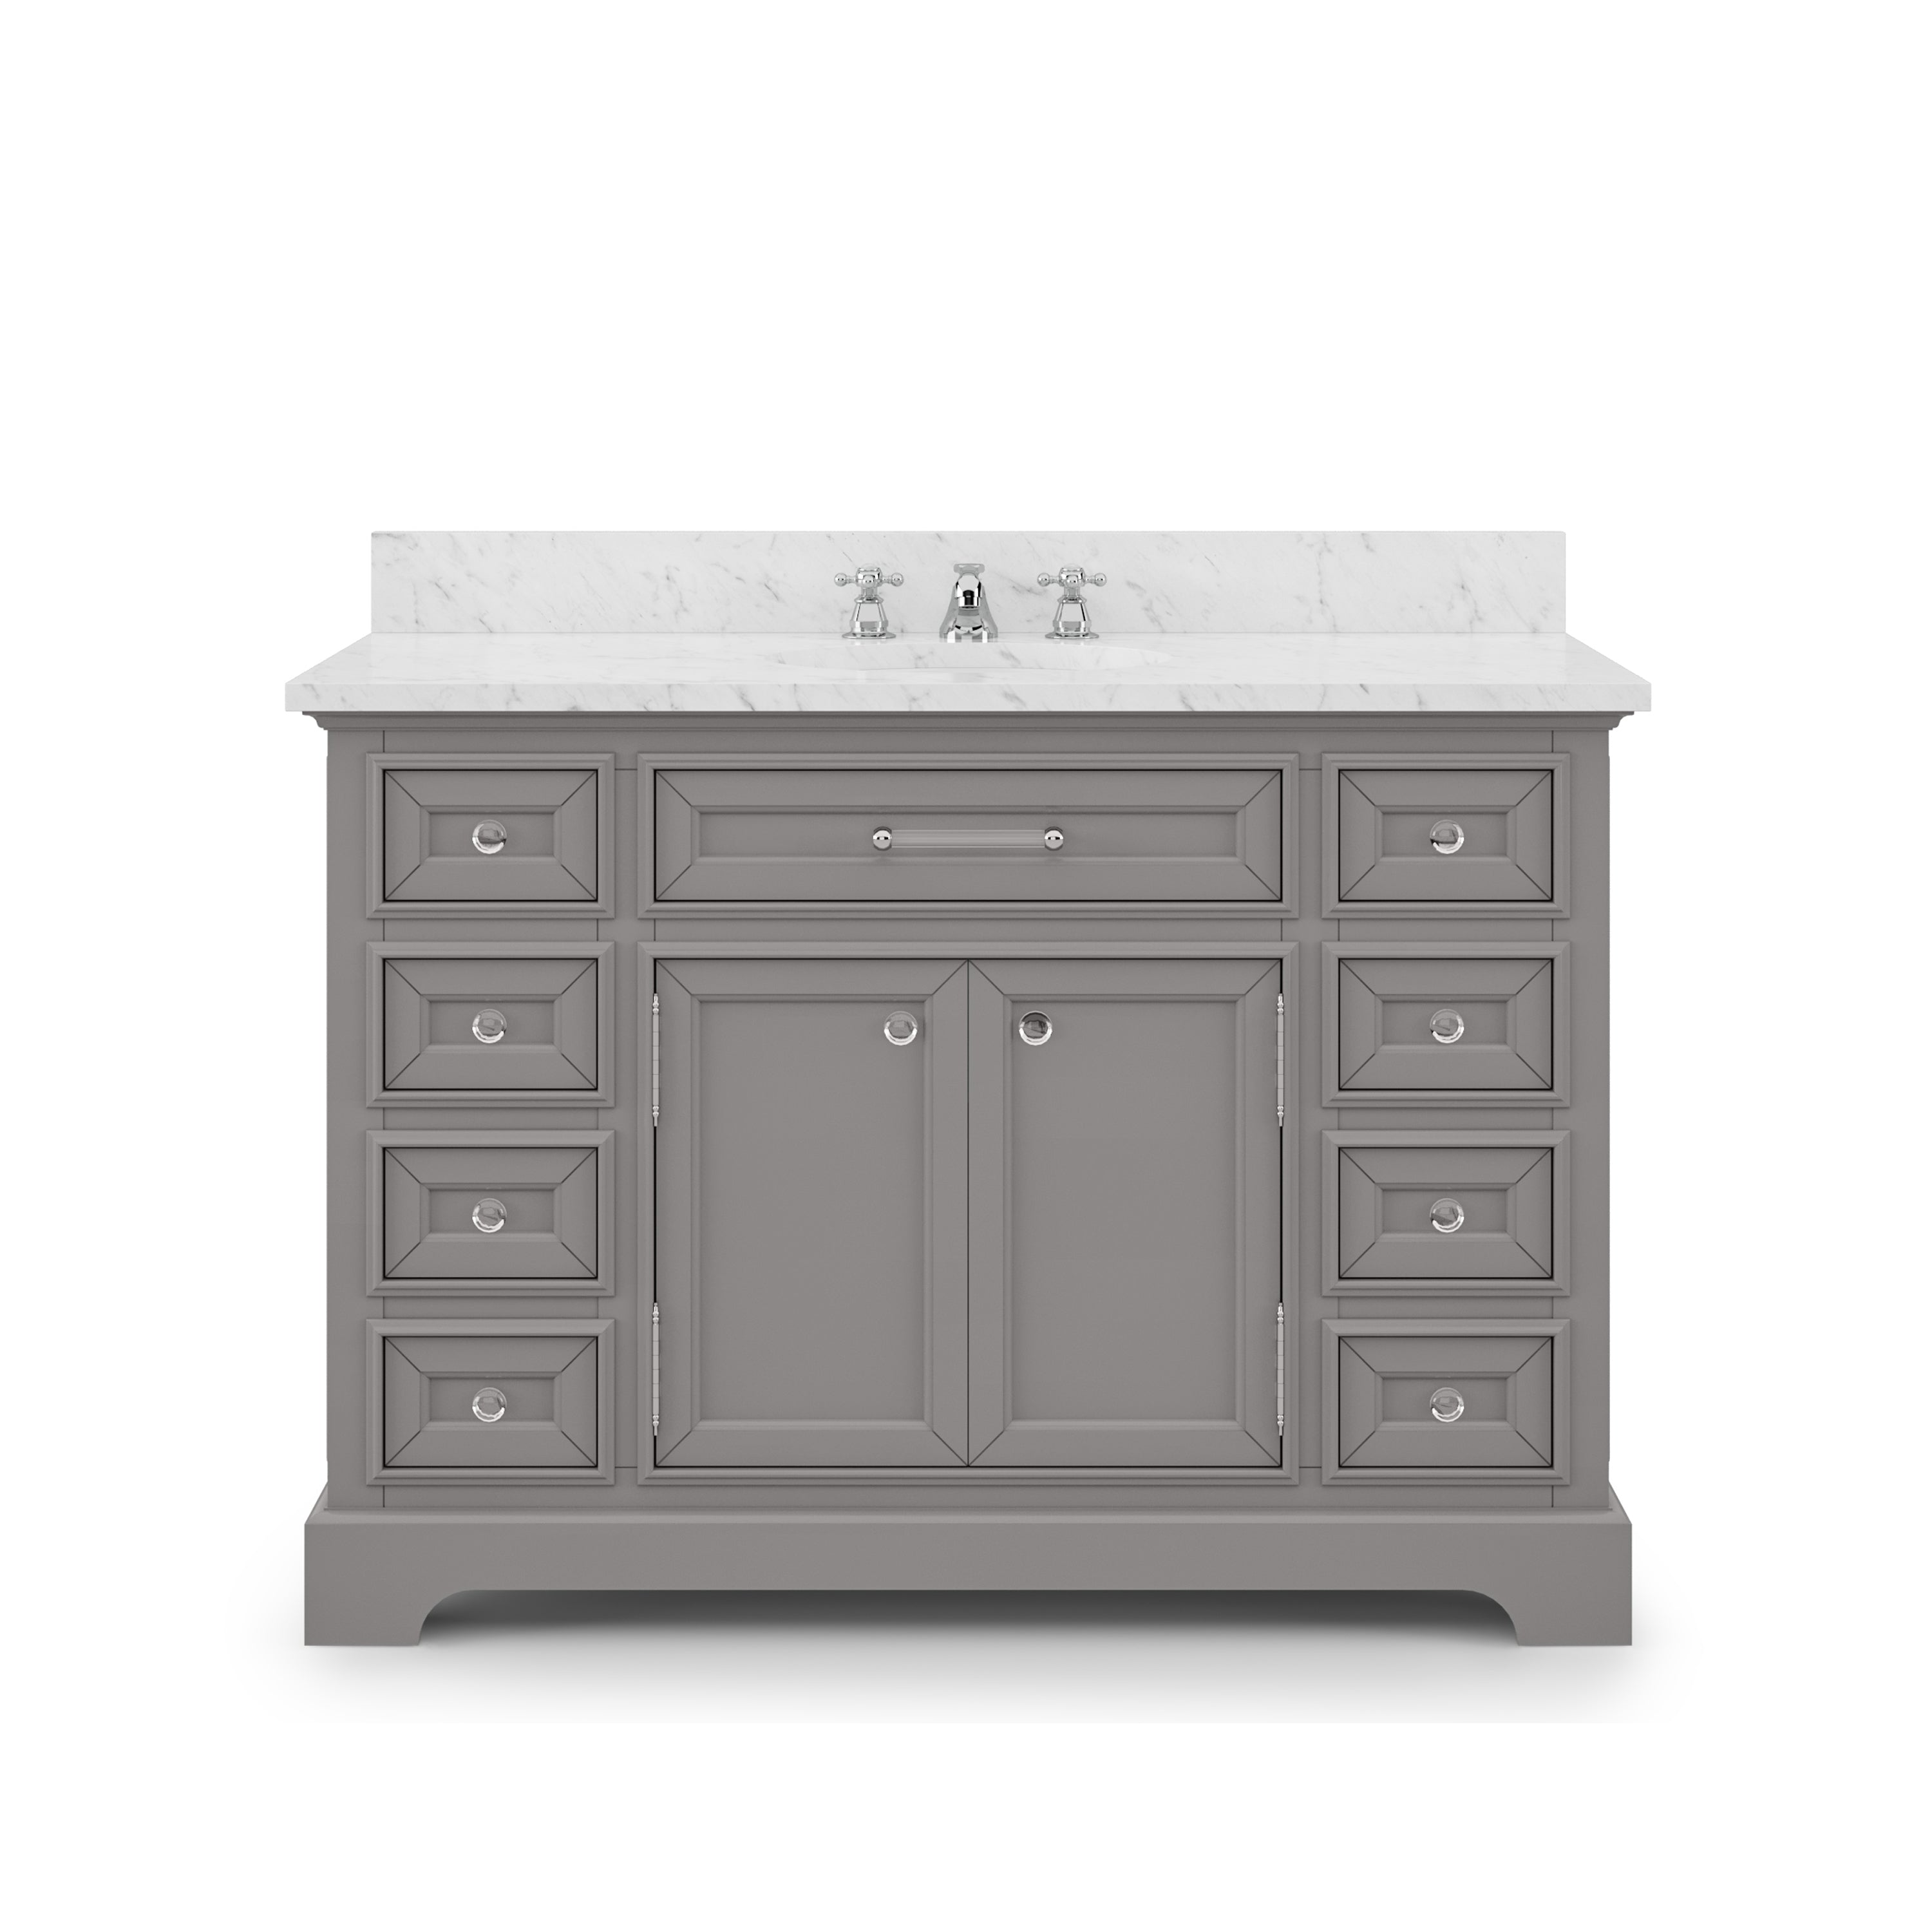 Water Creation | 48 Inch Cashmere Grey Single Sink Bathroom Vanity With Faucet From The Derby Collection | DE48CW01CG-000BX0901